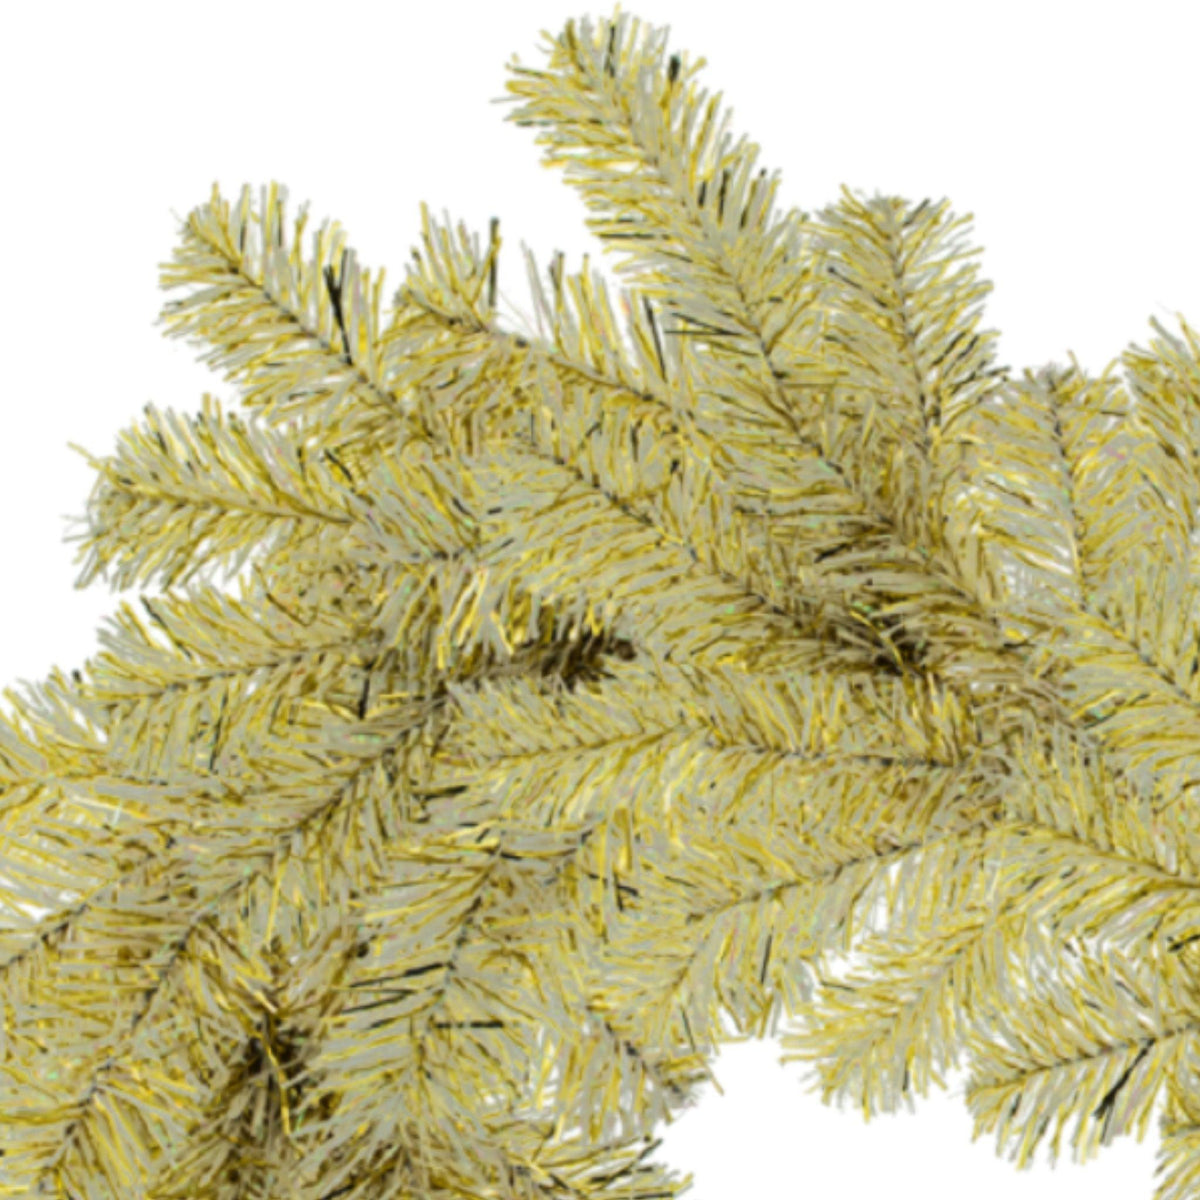 Shop for Lee Display's brand new 6FT Shiny Gold and Metallic Silver Tinsel Brush Garlands on sale at leedisplay.com.  Middle